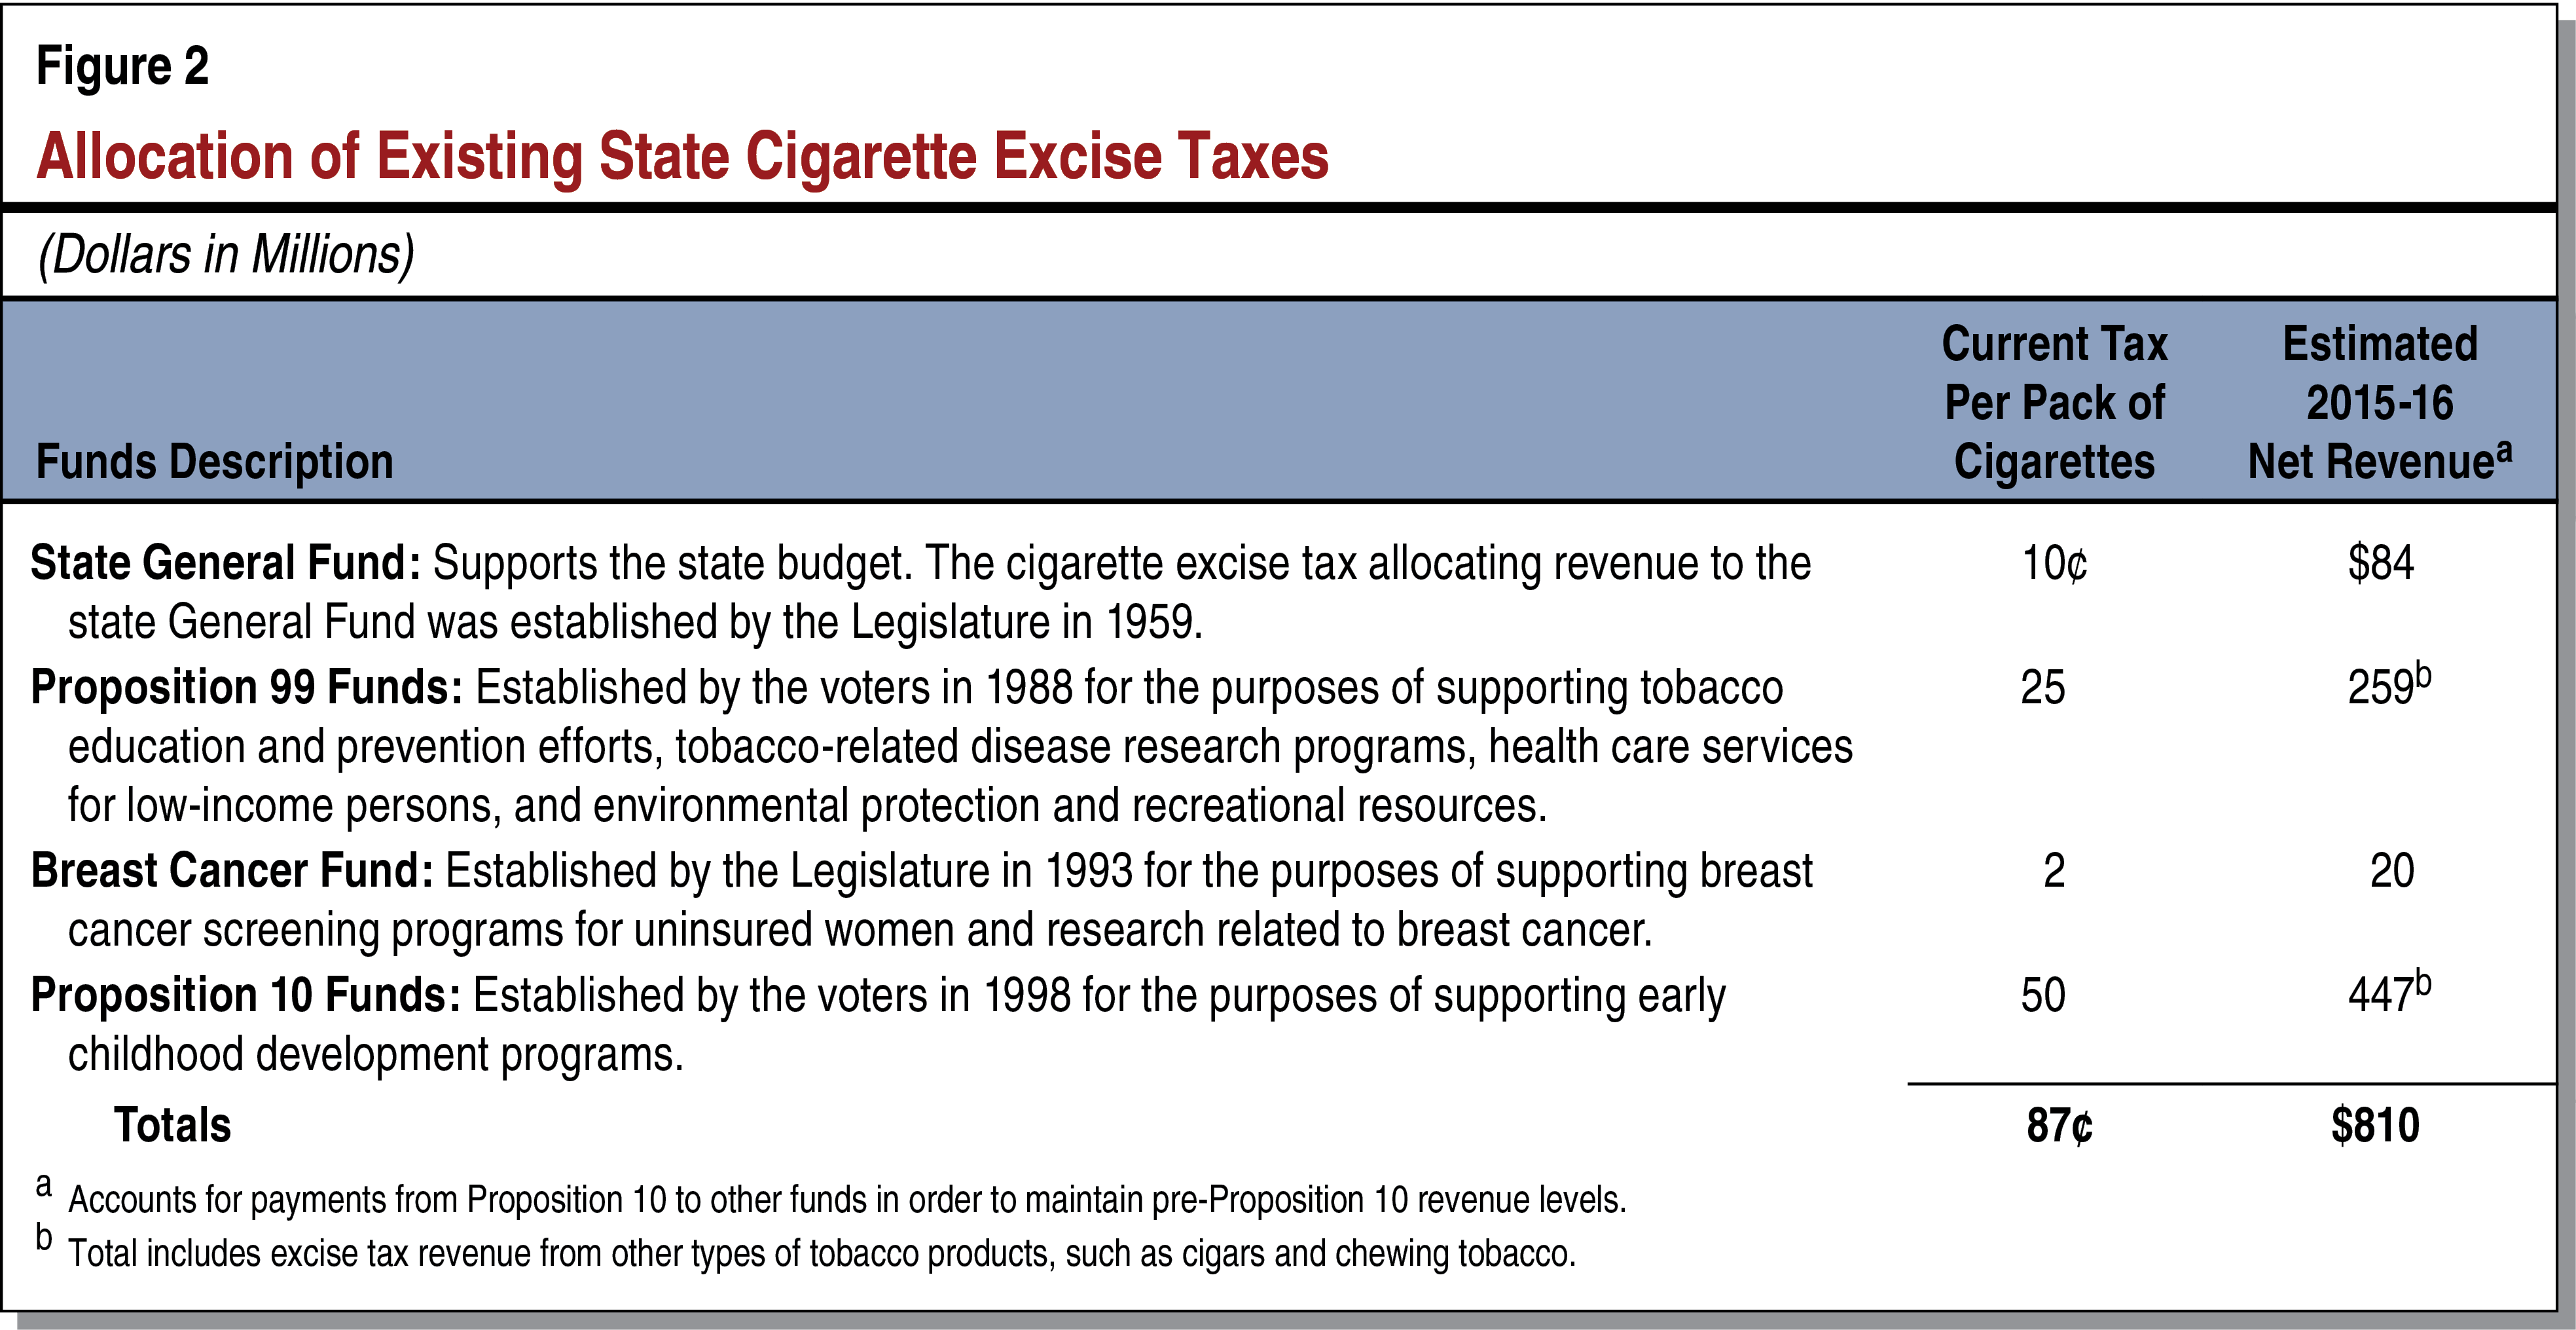 Figure 2 - Allocation of Existing State Cigarette Excise Taxes